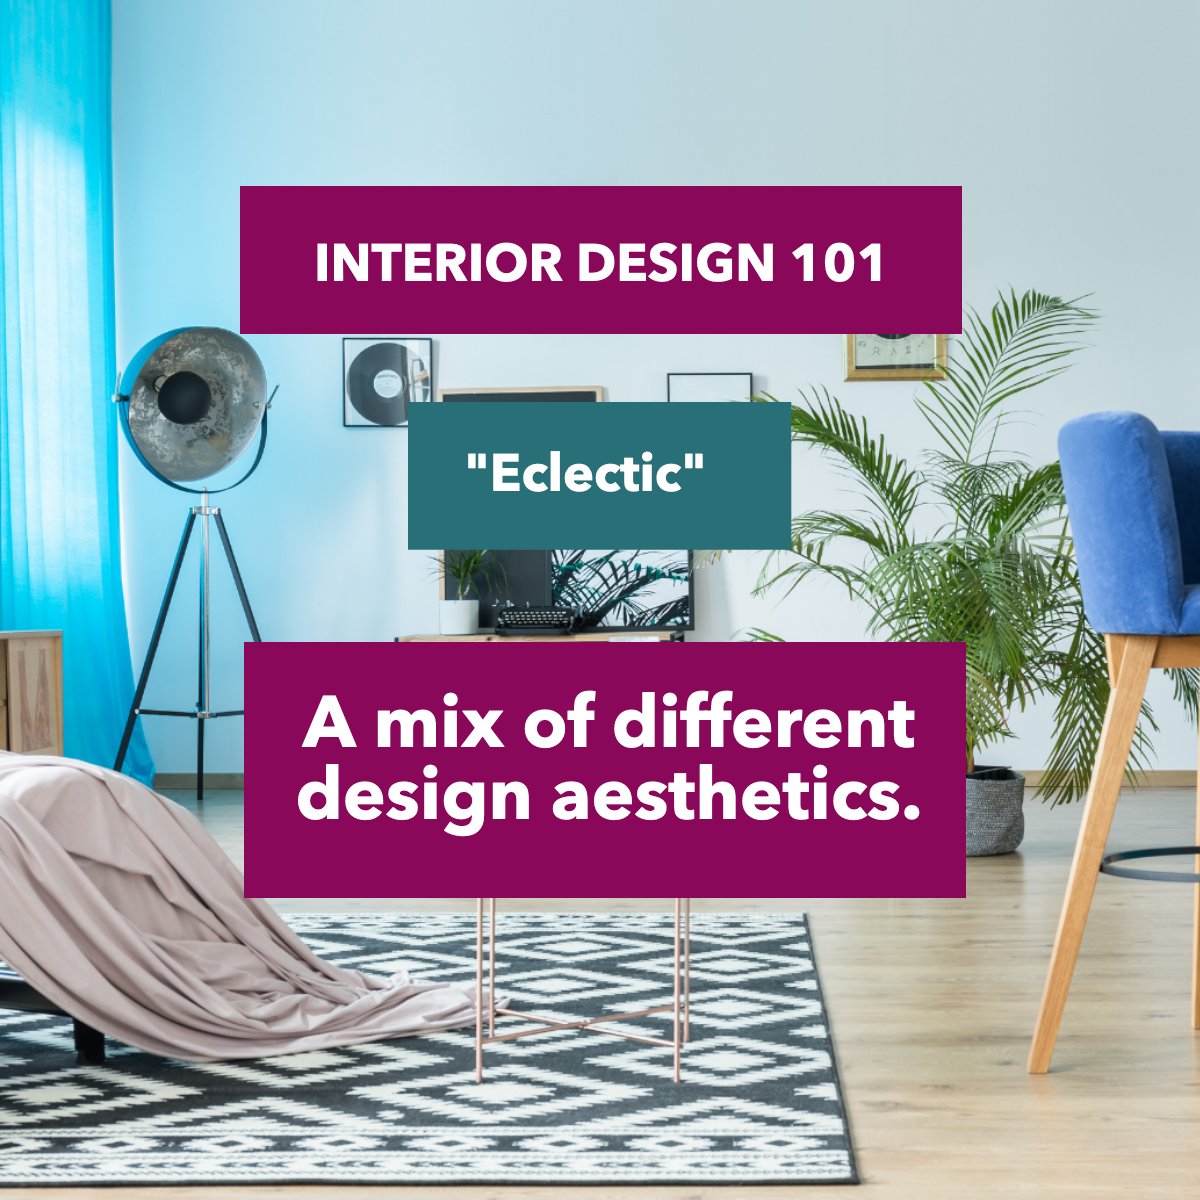 Interior Design 101

'Eclectic' 

A mix of different design aesthetics. 

#interiorsdesign #interiortrends #interiordesigning #interiordesigntrends #interiorsaddict #interiordesigntips #interiordesigngoals 
 #buyersagent #listingspecialist #militaryrelocation #realtor